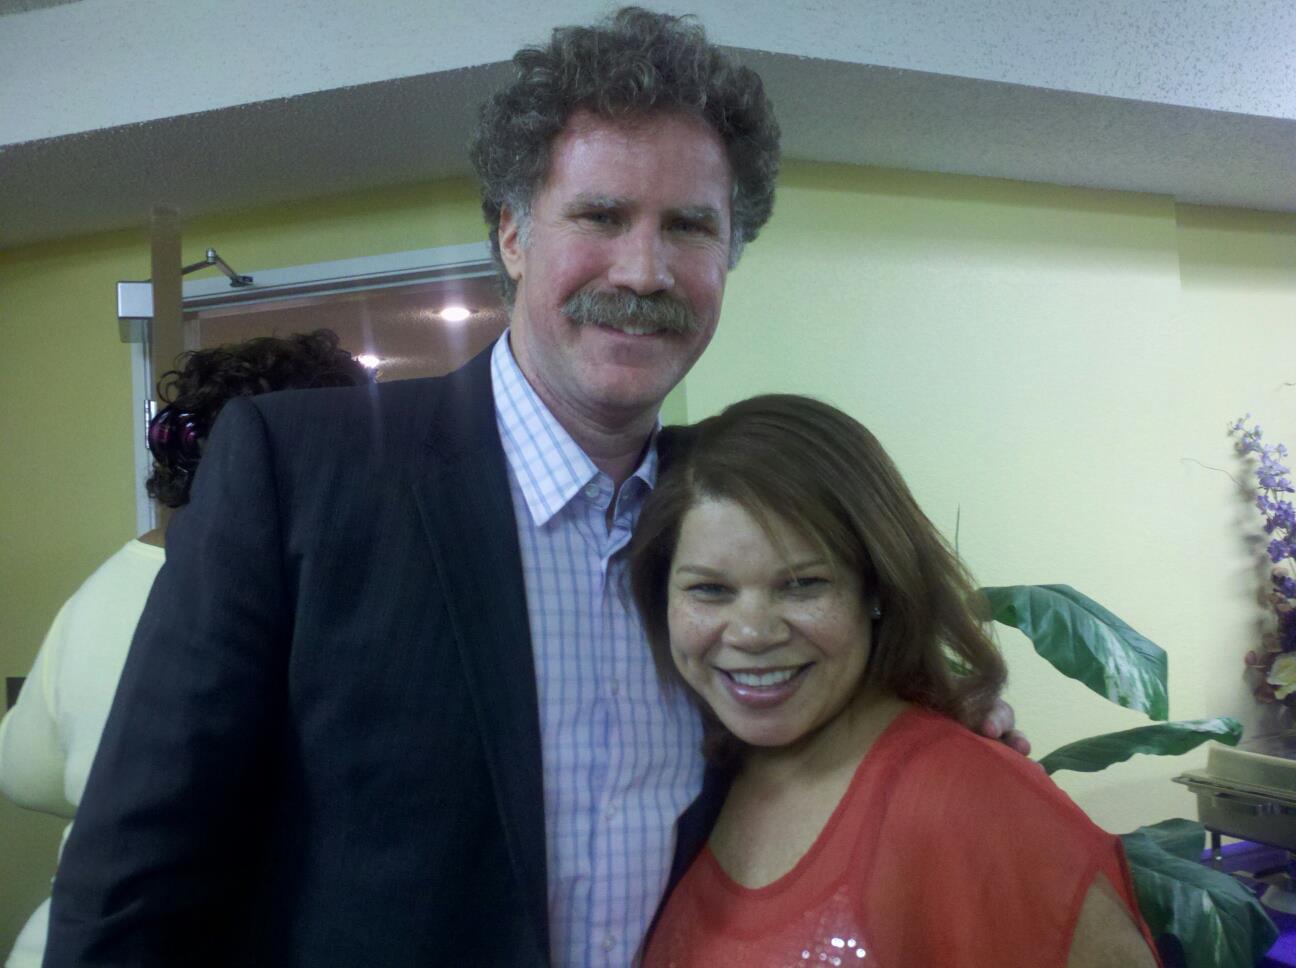 With Will Ferrell after we performed at SMBC.